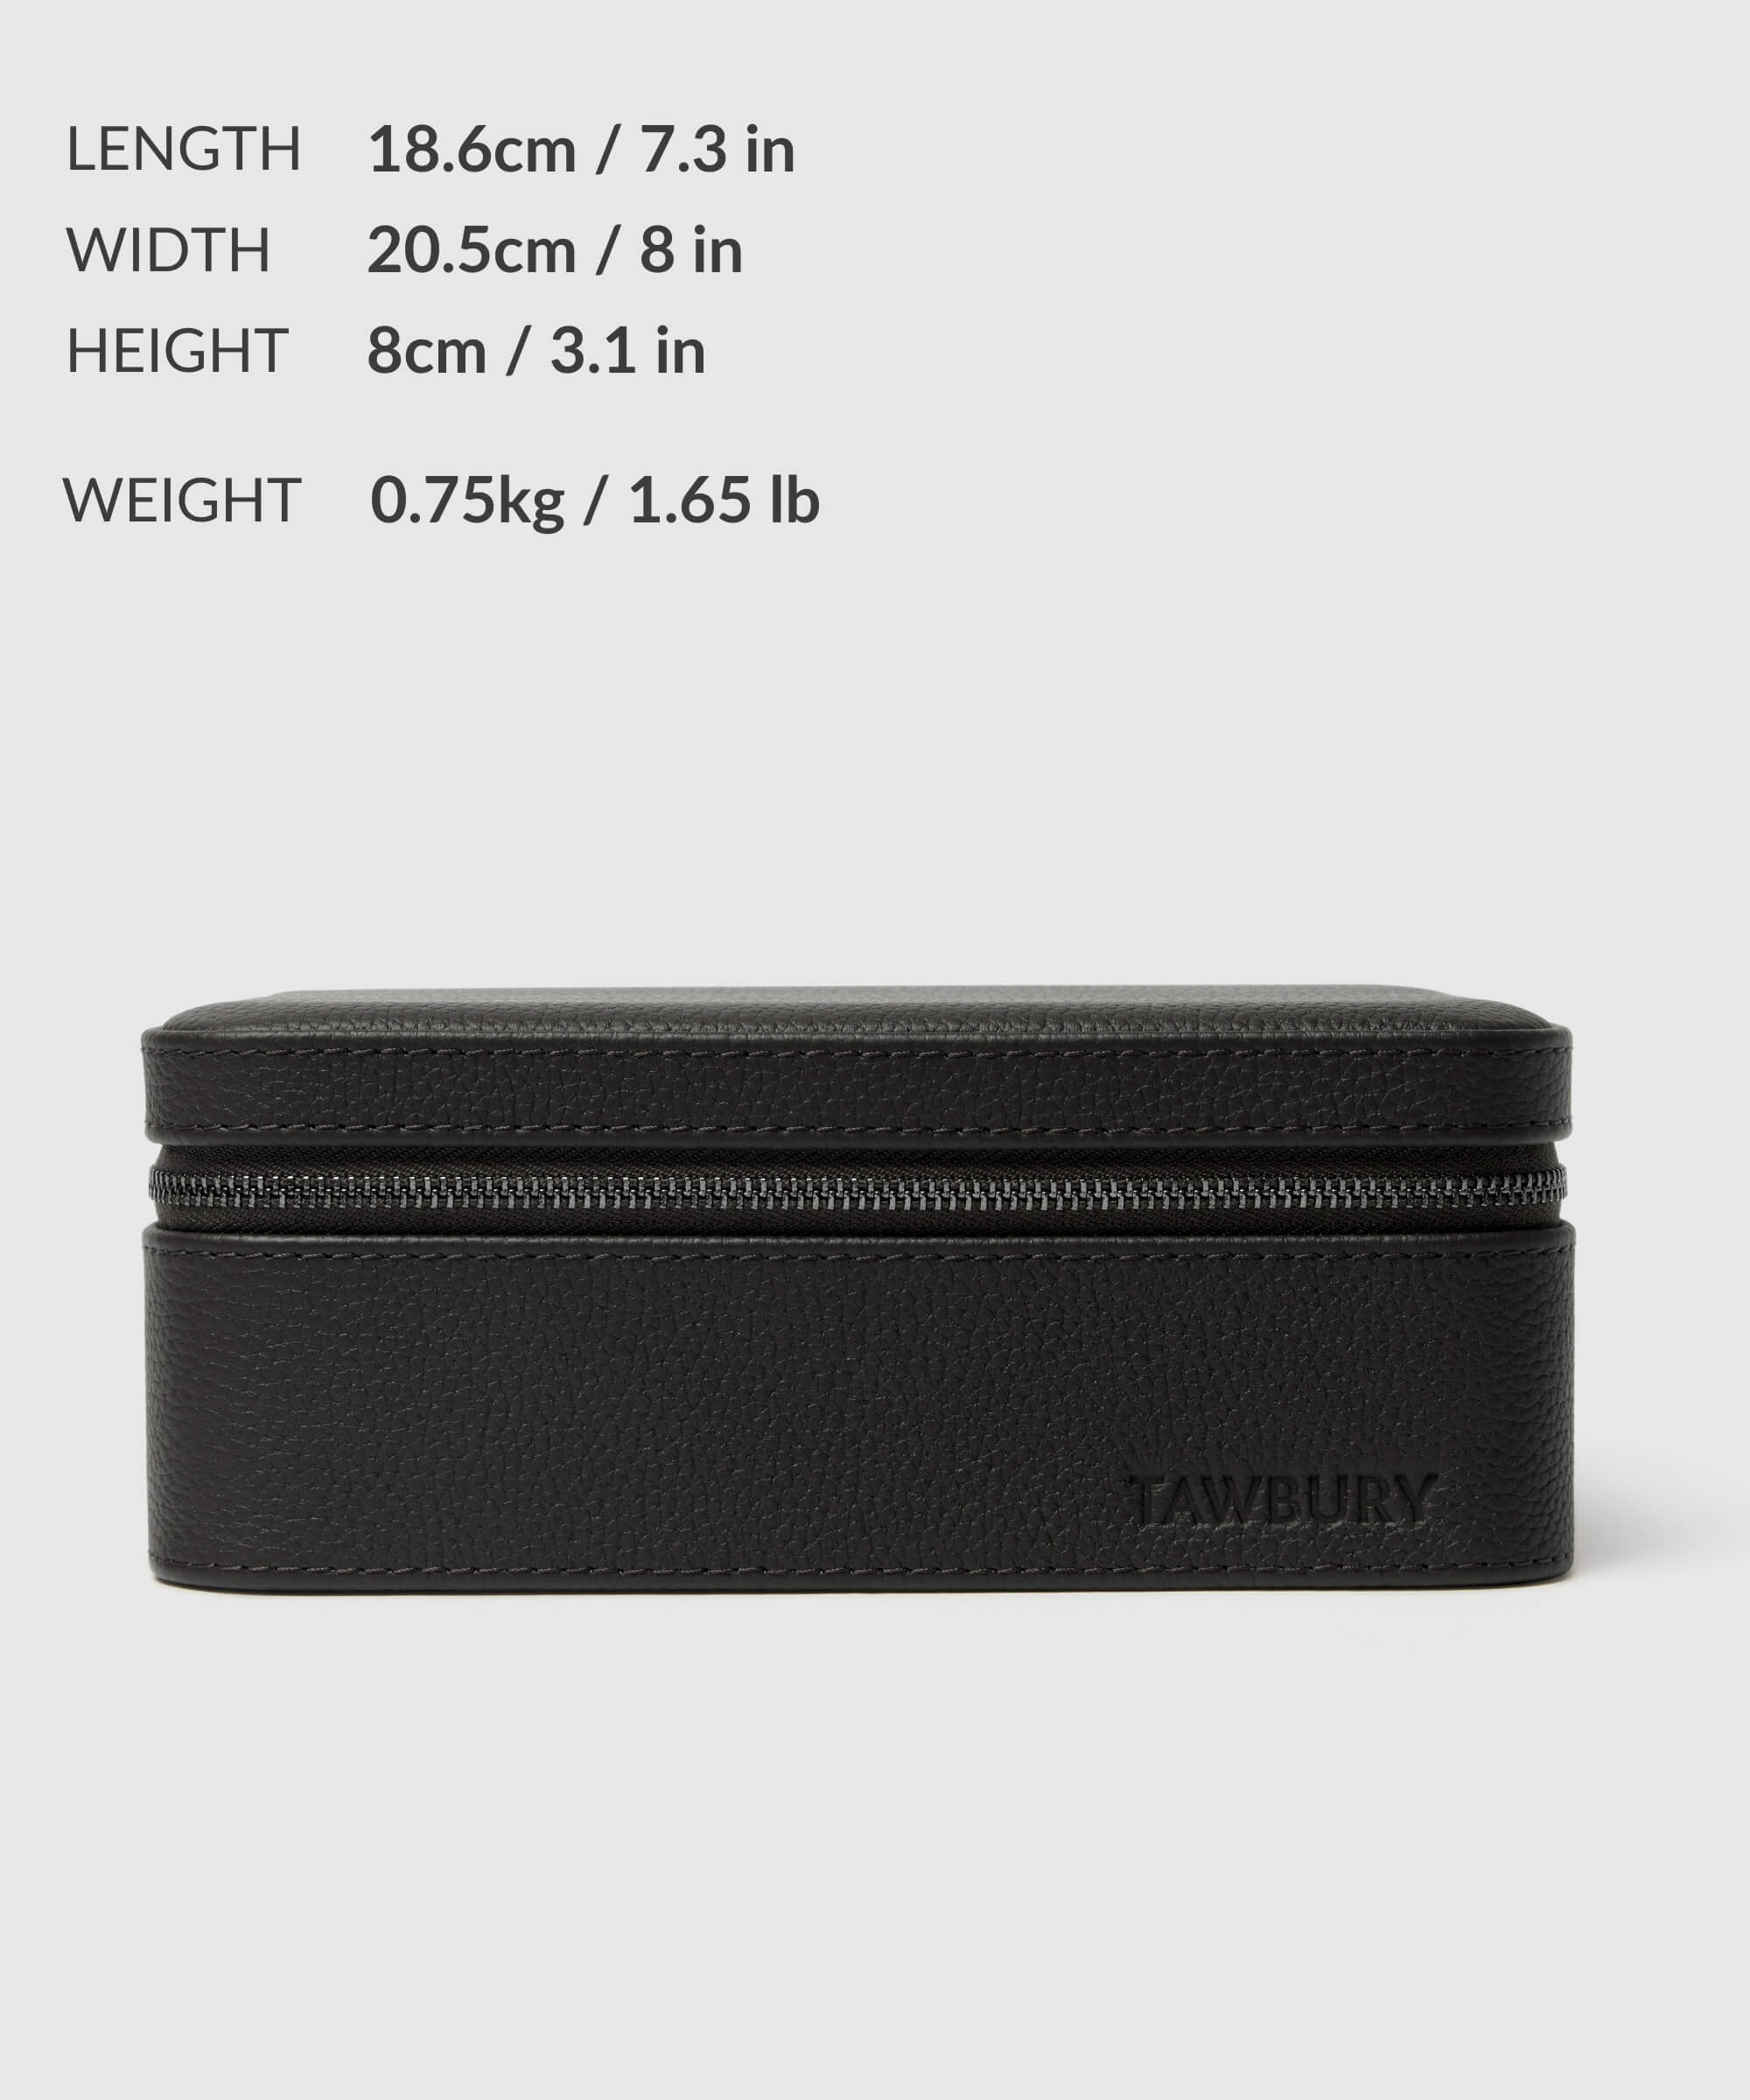 A black rectangular, luxury leather watch case with the brand name "TAWBURY" embossed on the front. Part of the TAWBURY range, it measures 18.6cm in length, 20.5cm in width, 8cm in height, and weighs 0.75kg — perfect for your Fraser 6 Watch Travel Case - Black (Coming Soon) collection.